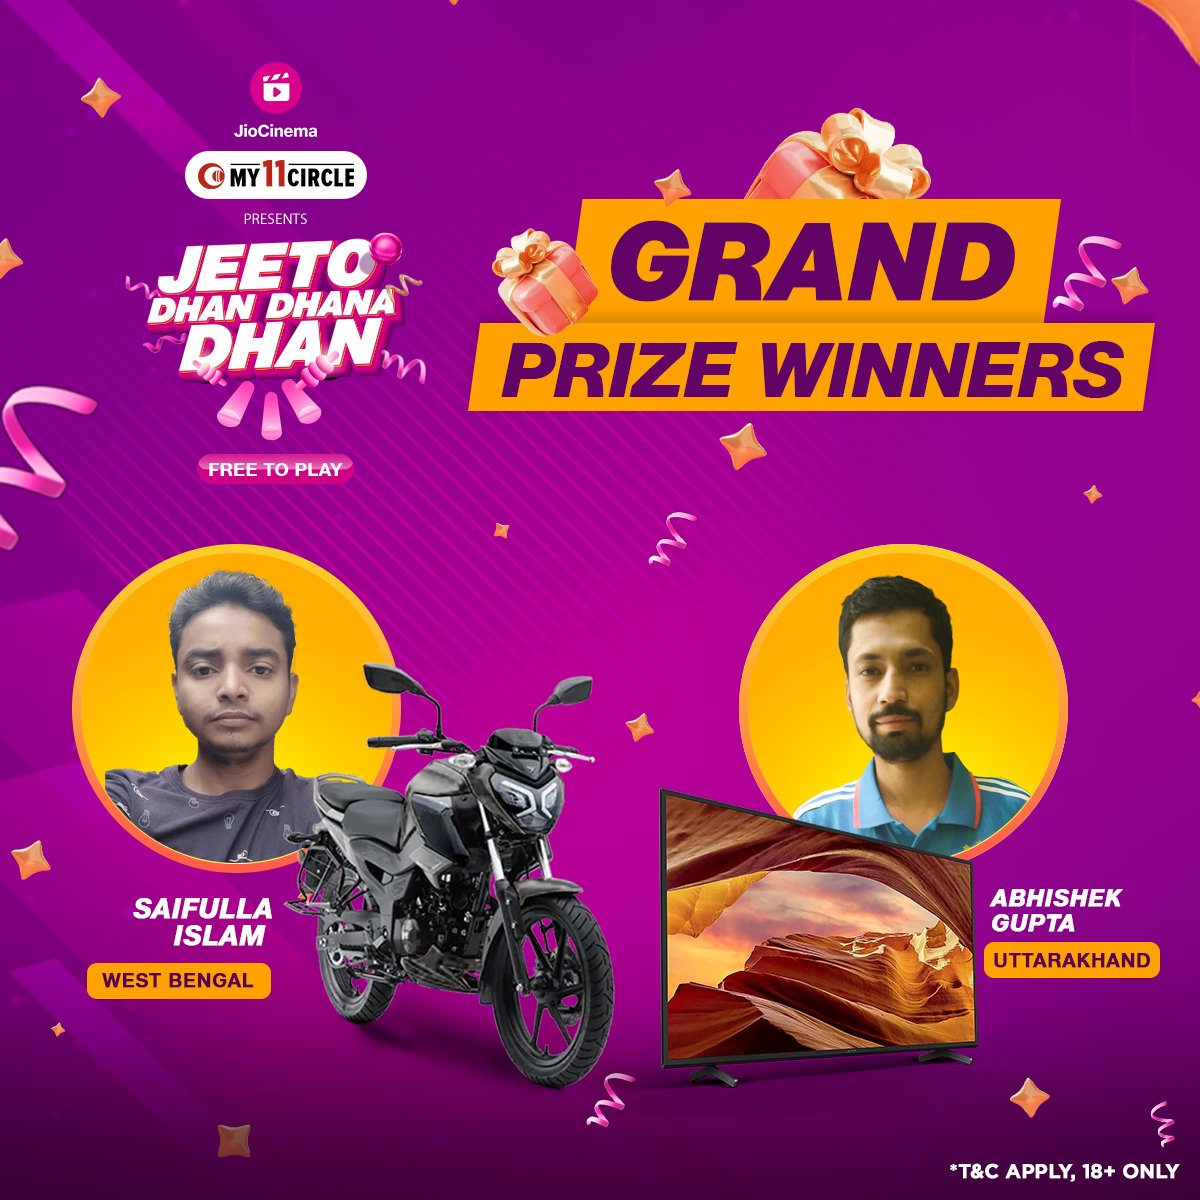 Big congratulations 🎉 to the winners of Match 41! 🙌

Play and stand a chance to win daily with #My11Circle presents #JeetoDhanDhanaDhan only on #JioCinema. 🥳

Keep playing & don’t forget to make your team on @My11Circle  app!

*T&C Apply, 18+